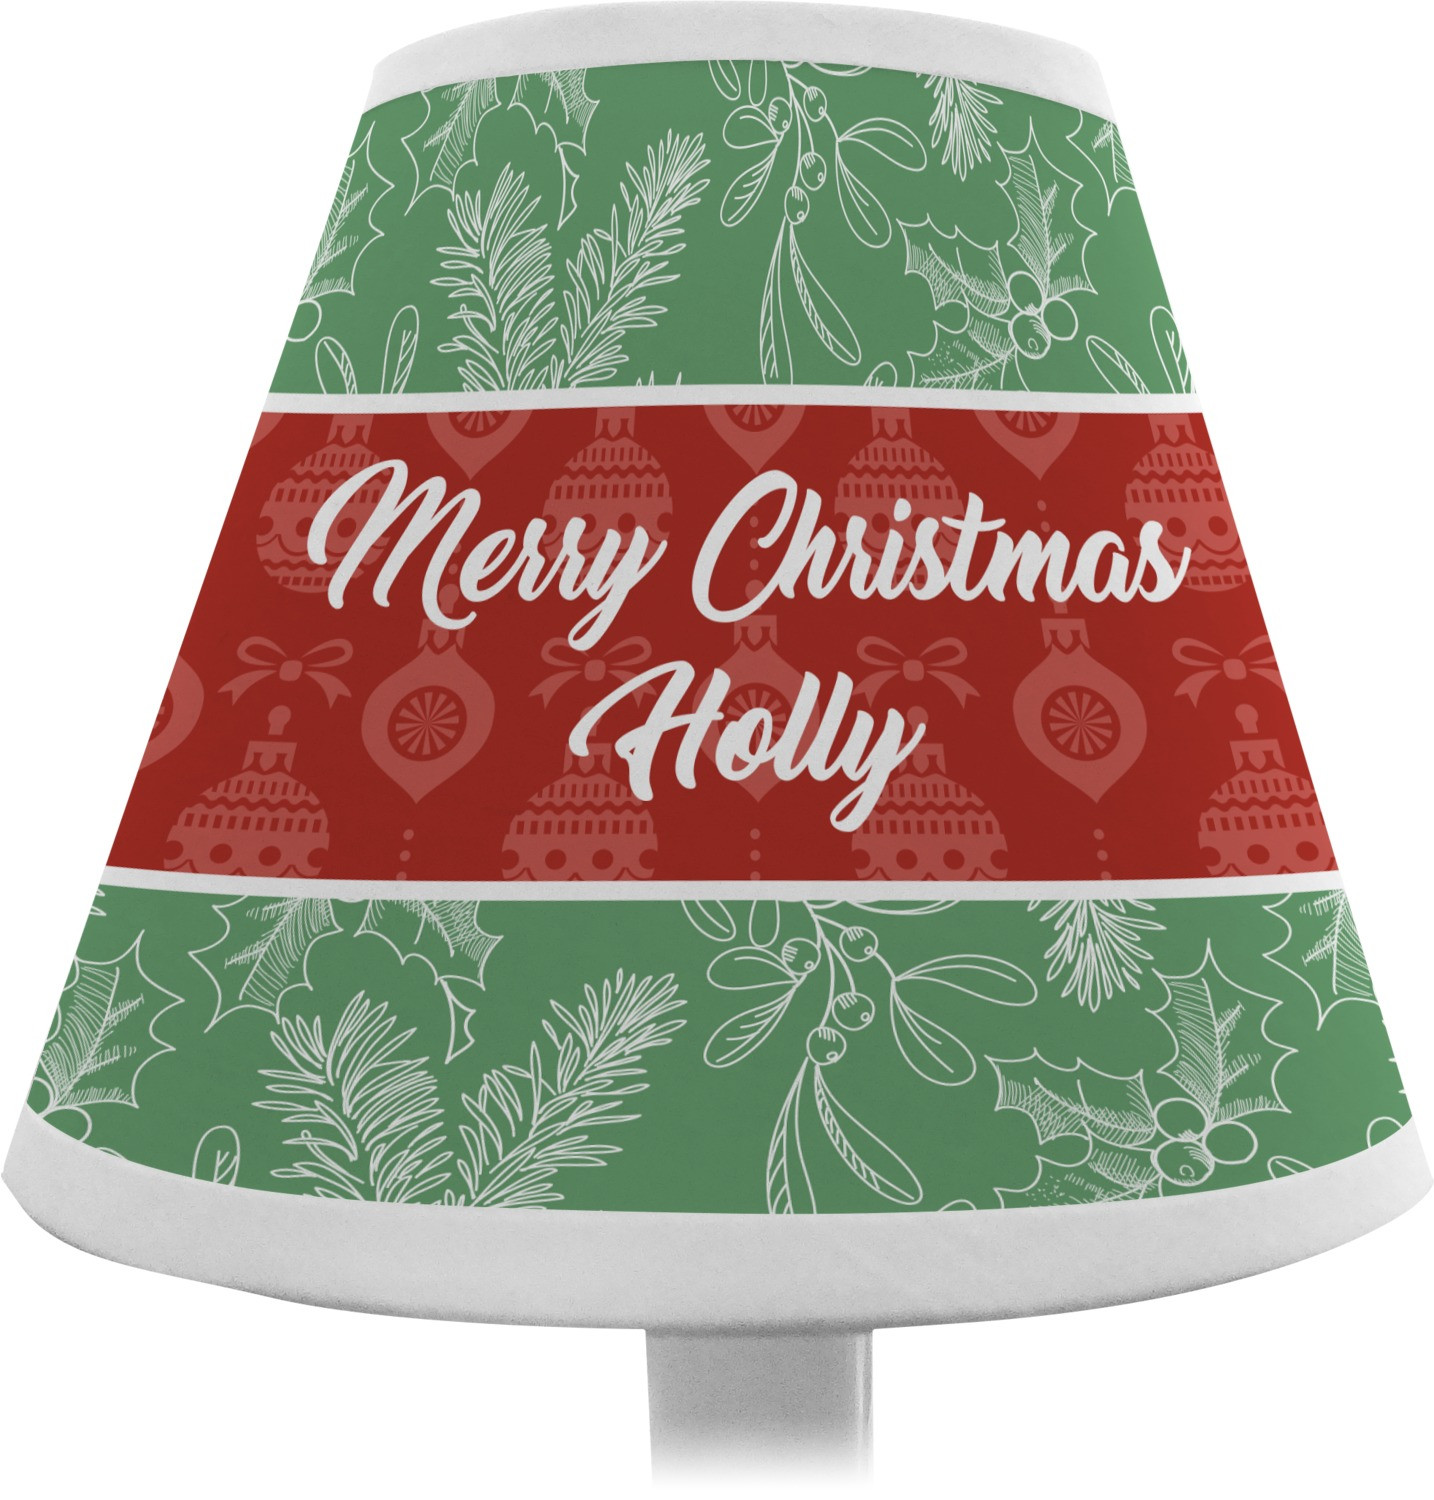 Christmas Chandelier Lamp Shades
 Christmas Holly Chandelier Lamp Shade Personalized